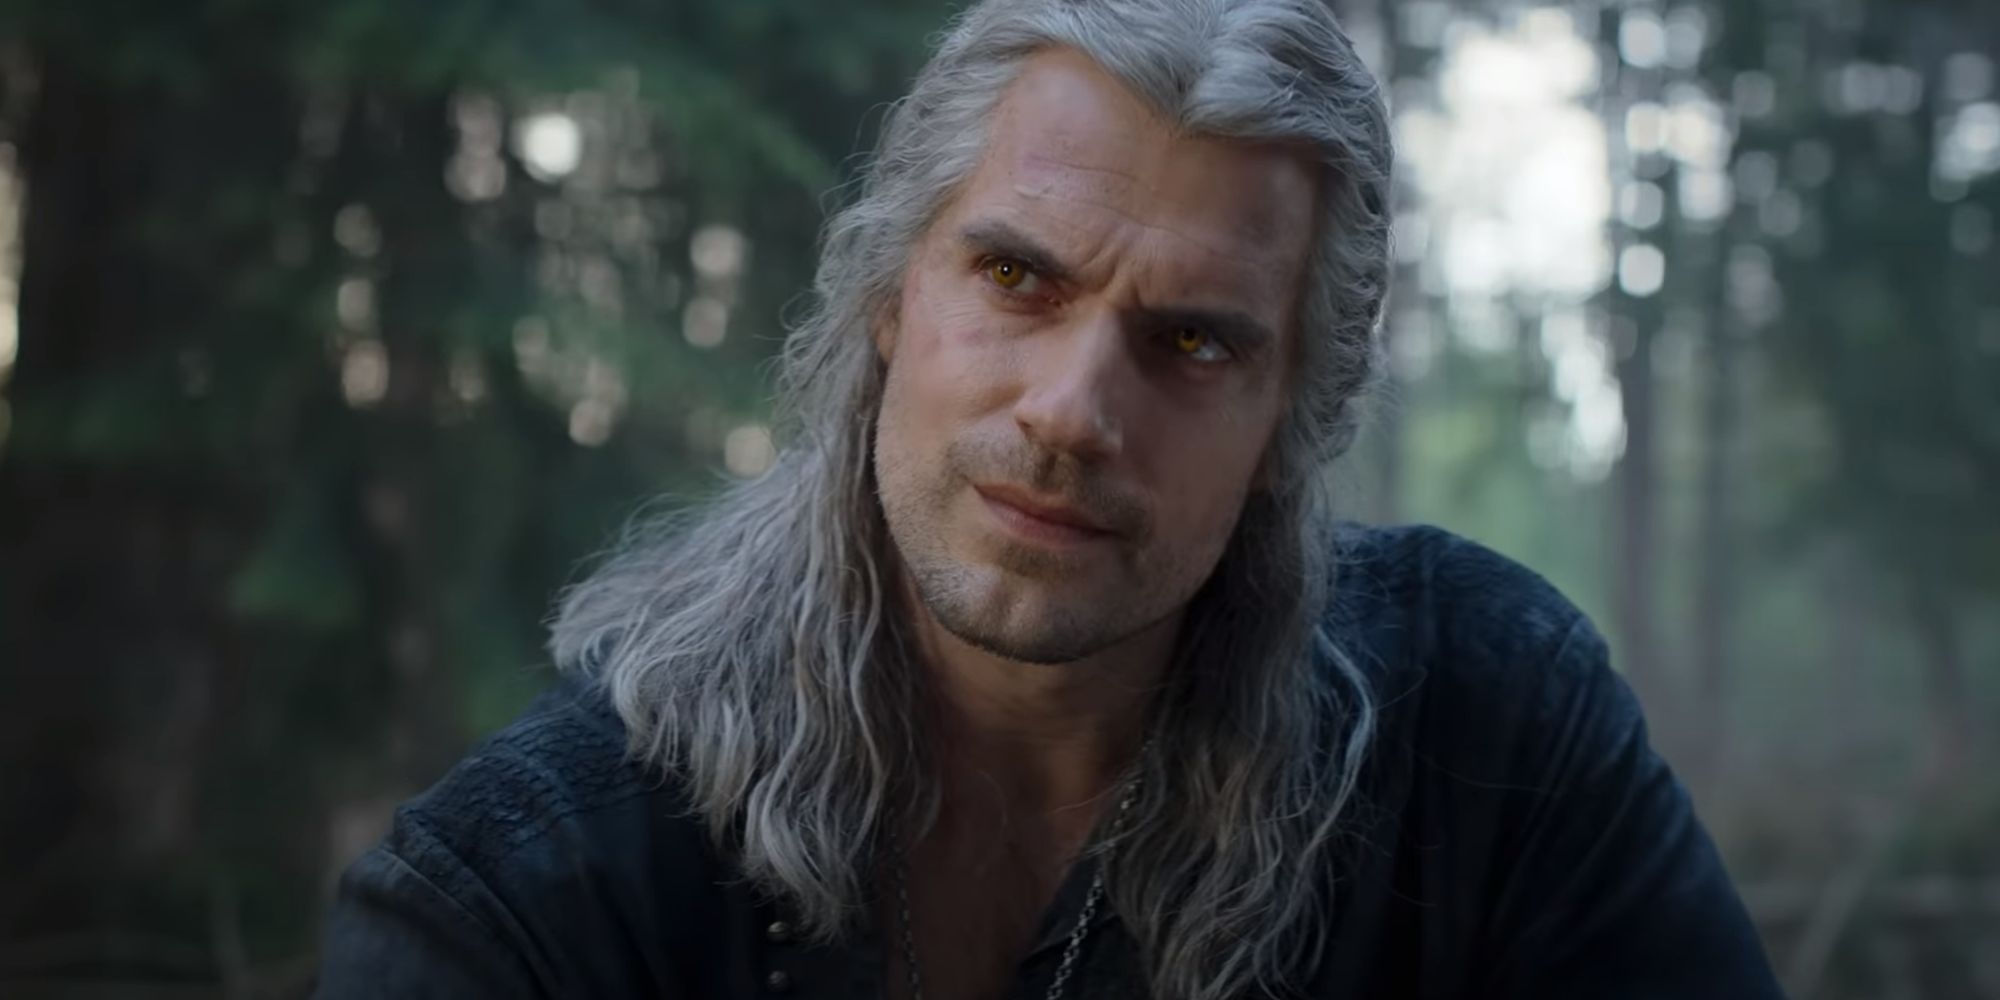 The Witcher season 3 sets up an epic finale for Henry Cavill’s Geralt